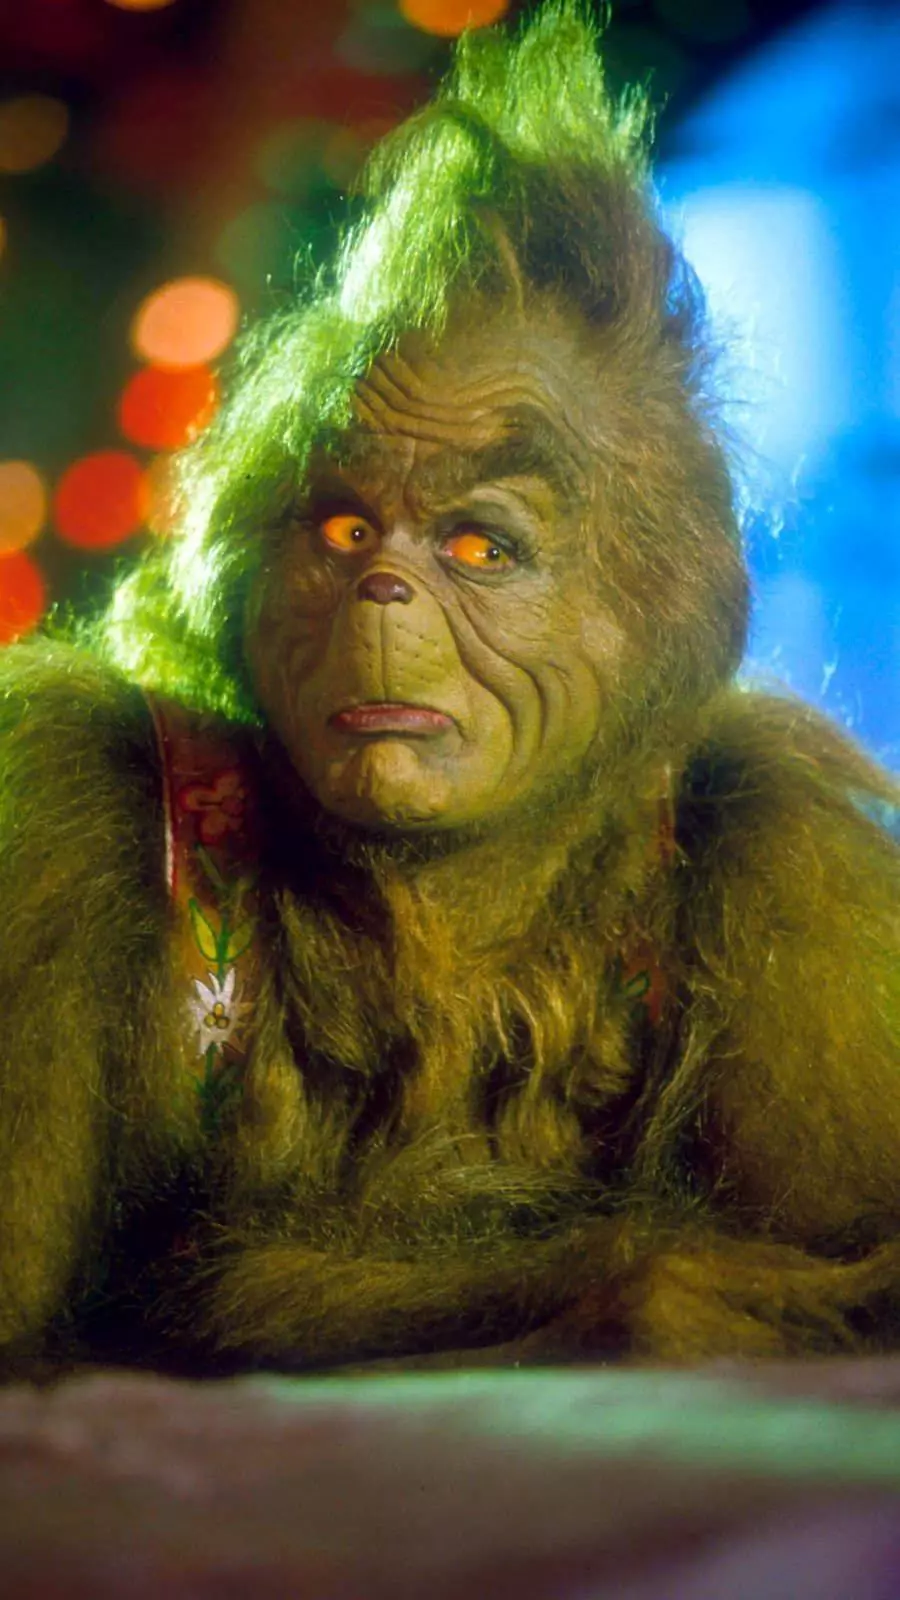 The Grinch played by Jim Carey in the 2000 film (